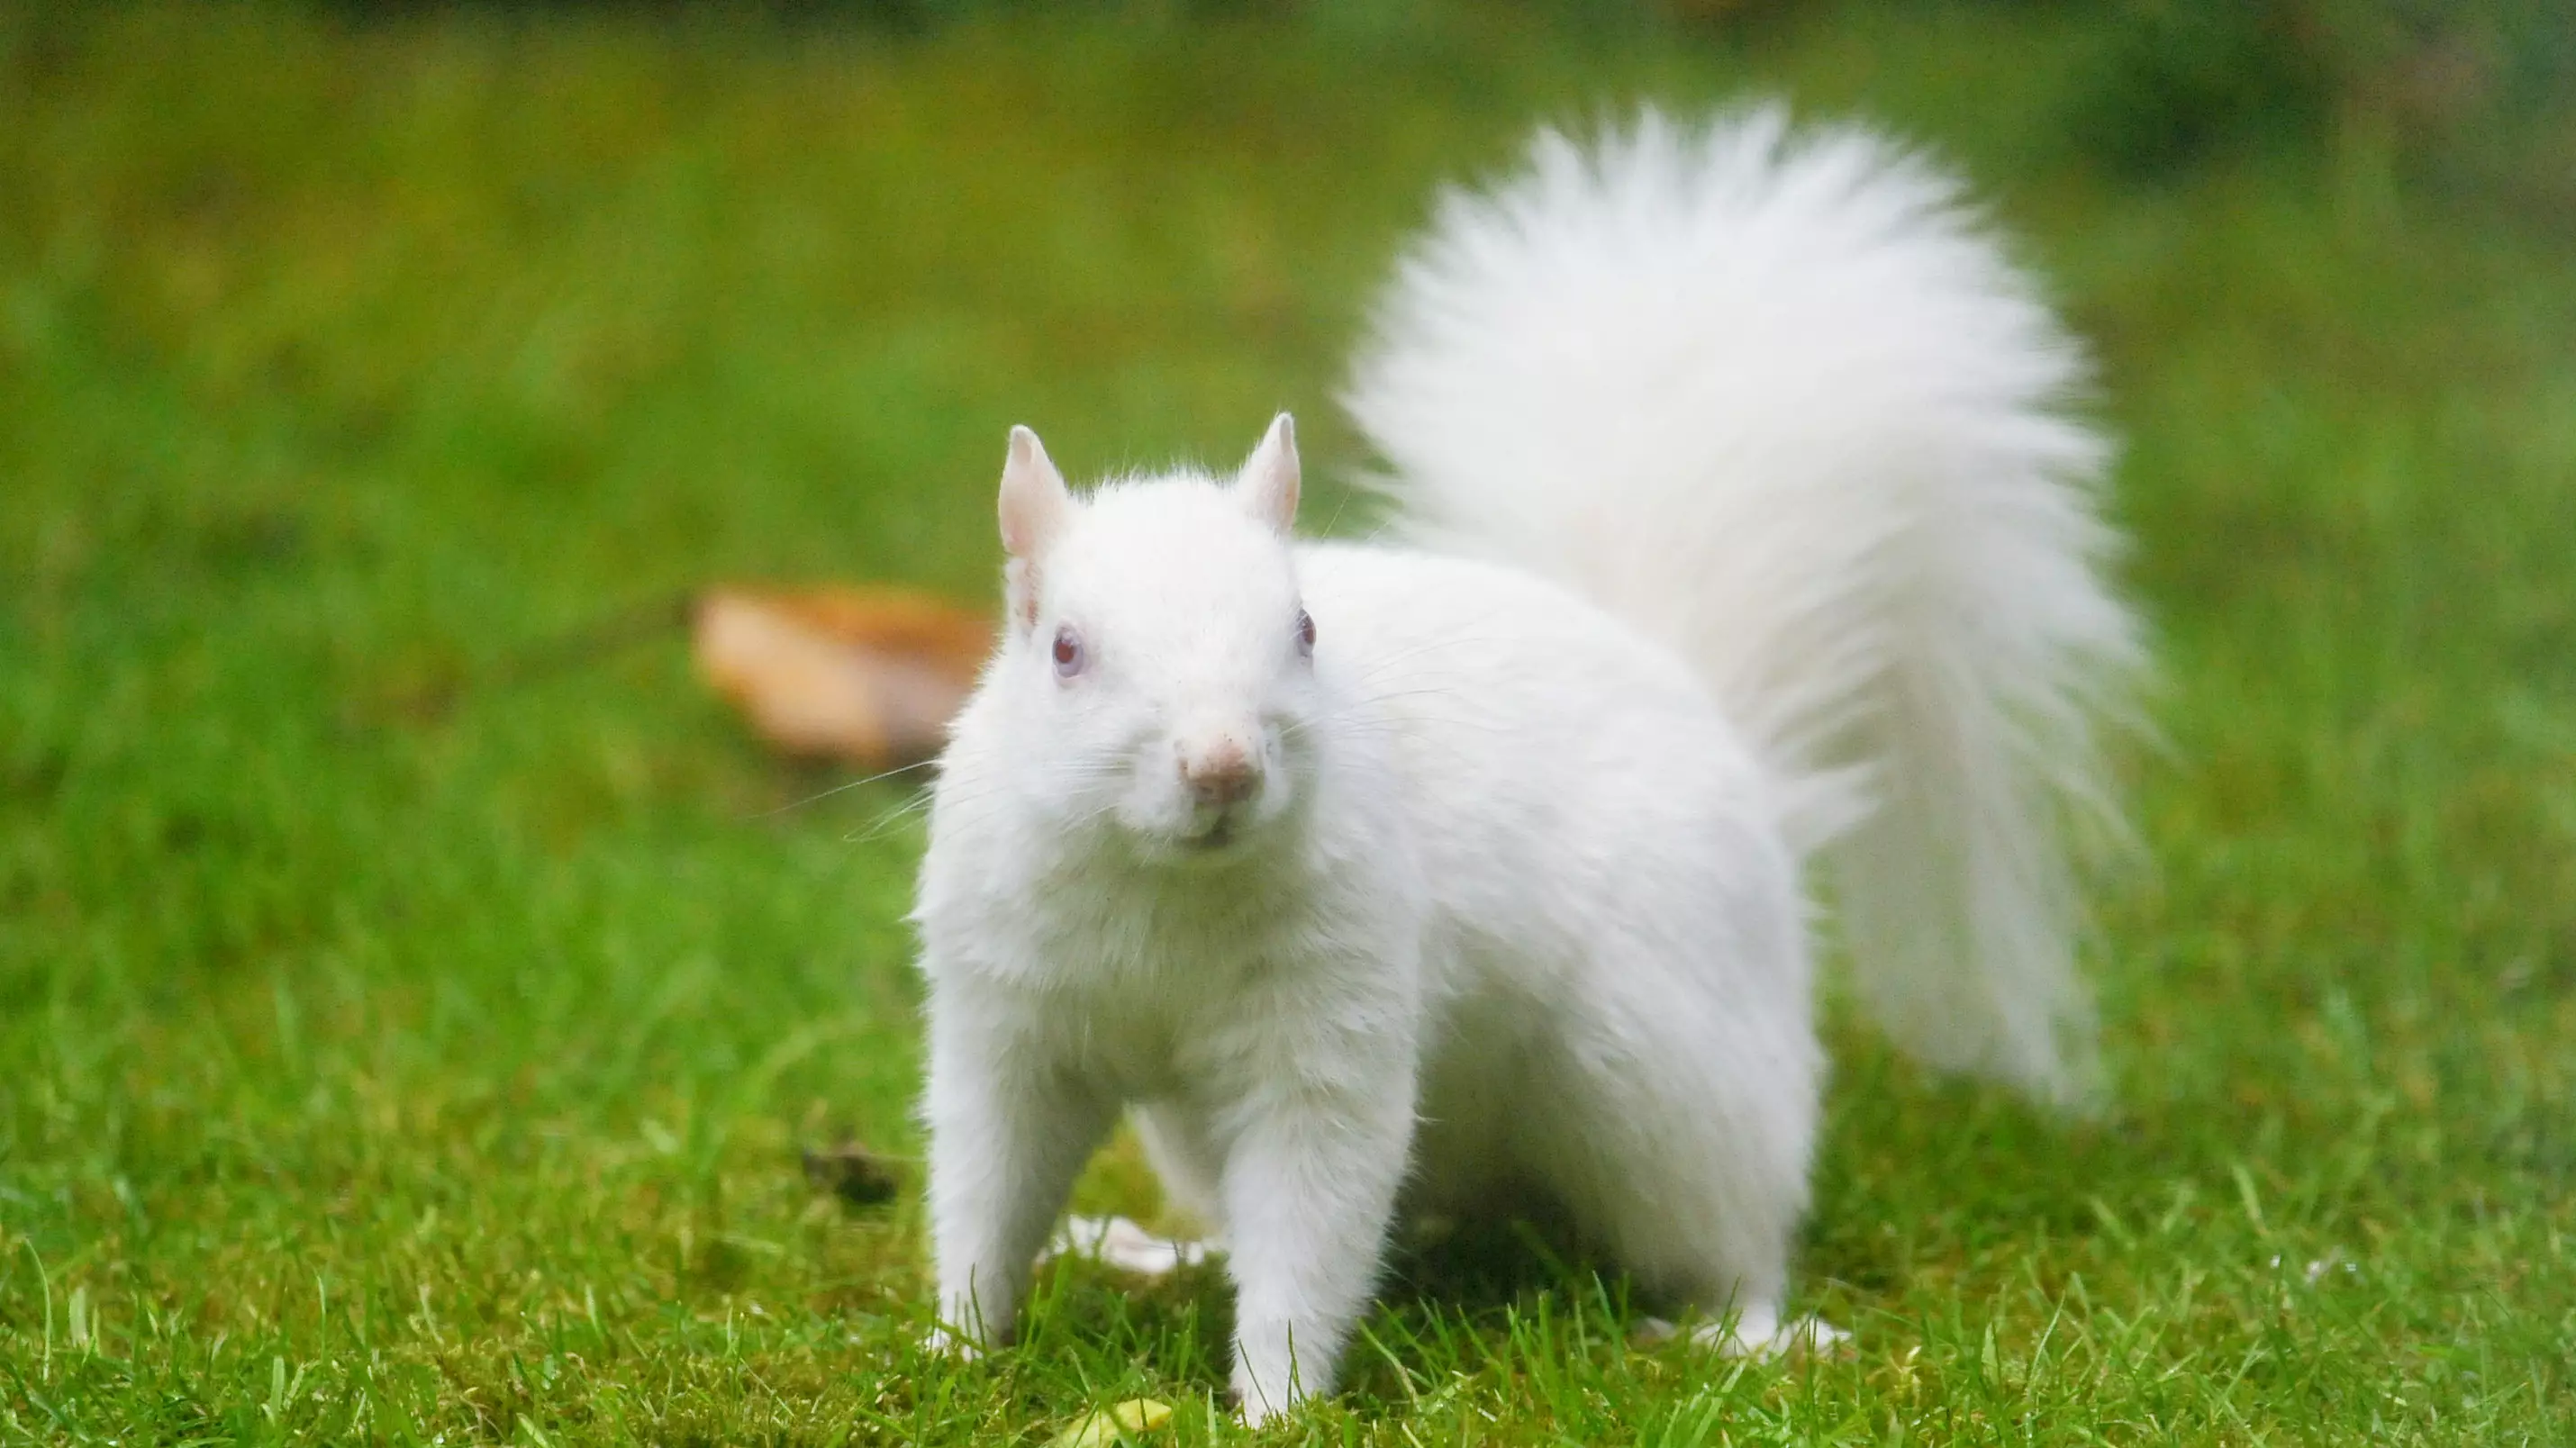 Stunning Pictures Of Rare Albino Squirrel Scavenging For Food In Family's Garden